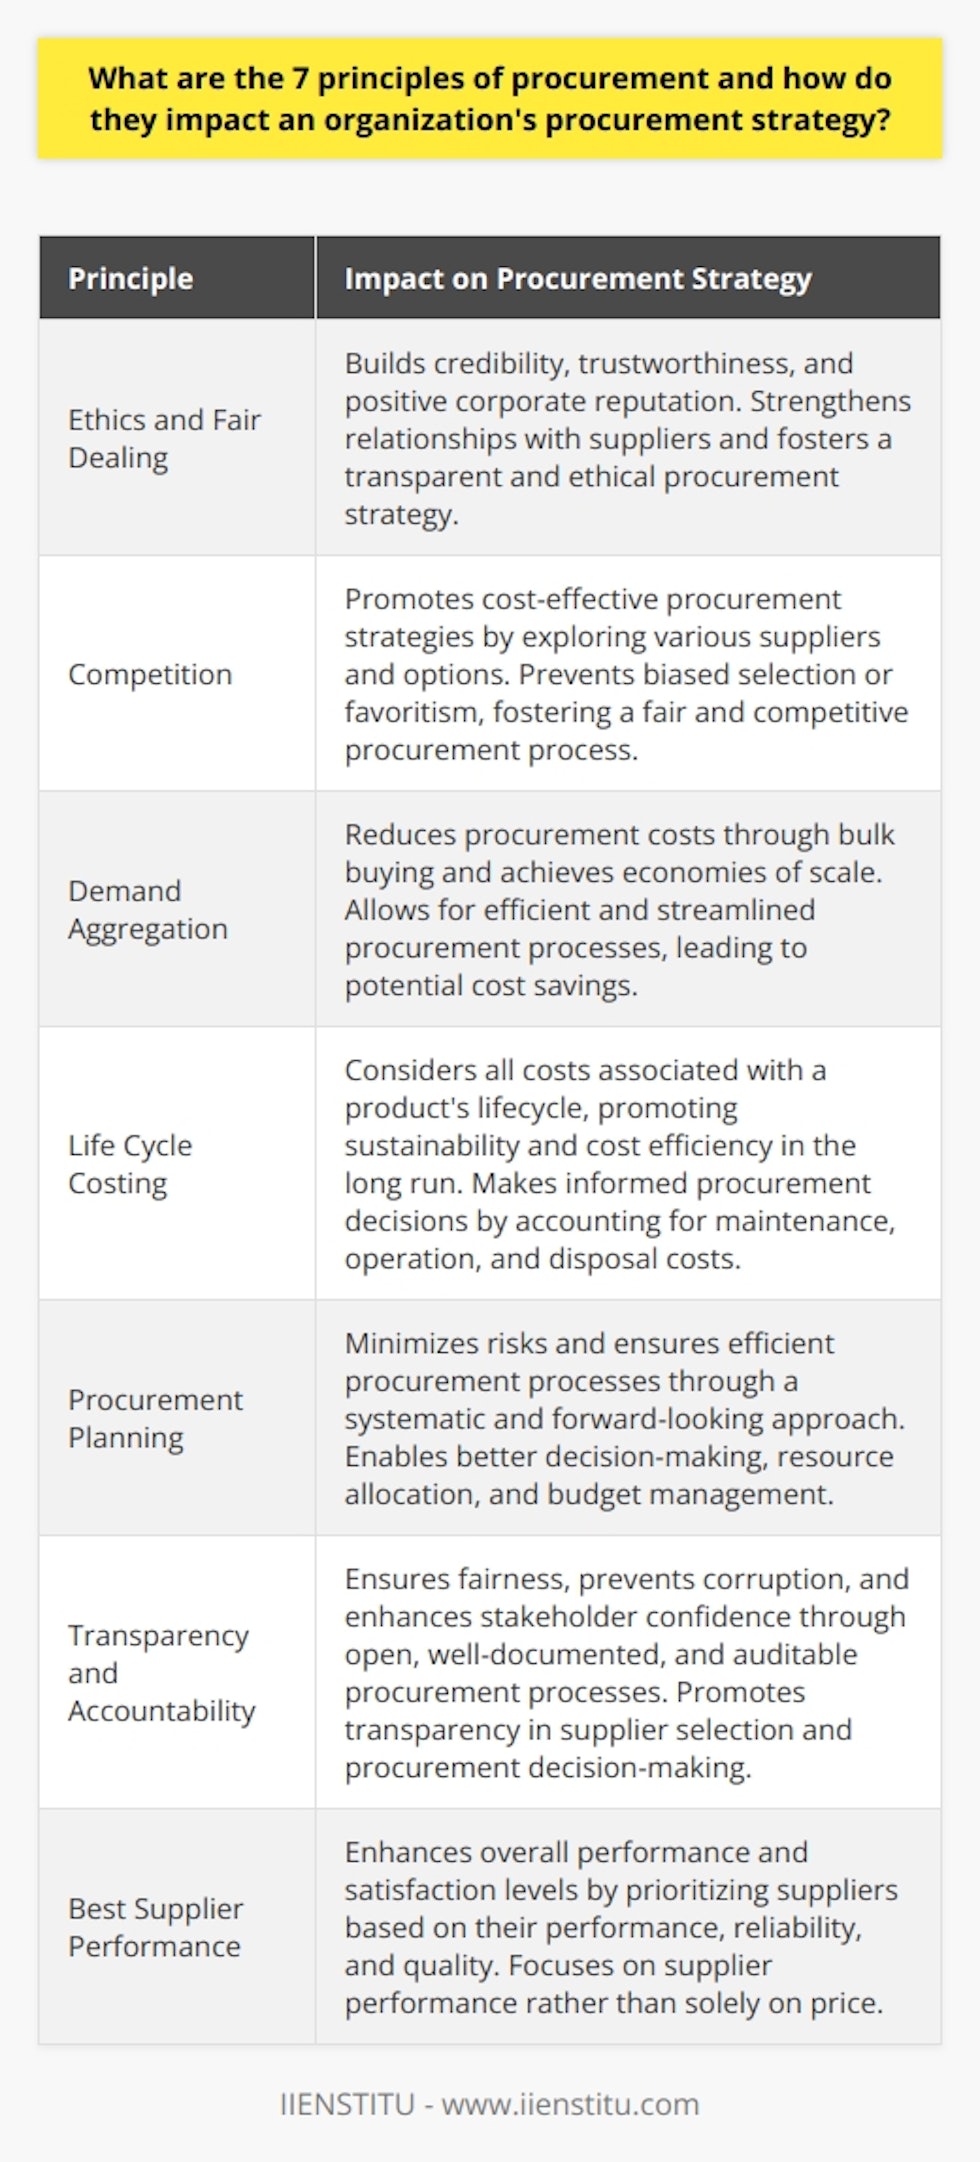 The 7 principles of procurement have a profound impact on an organization's procurement strategy. These principles include ethics and fair dealing, competition, demand aggregation, life cycle costing, procurement planning, transparency and accountability, and best supplier performance. By adhering to these principles, organizations can enhance their credibility, achieve the best value for money, reduce costs, ensure sustainability, prevent corruption, and promote high-quality goods and services.The principle of ethics and fair dealing emphasizes honesty, fairness, and integrity in transactions. By following this principle, organizations can build credibility, trustworthiness, and a positive corporate reputation. This, in turn, strengthens relationships with suppliers and fosters a more transparent and ethical procurement strategy.The principle of competition focuses on obtaining the best value for money. This principle encourages organizations to explore various suppliers and options, promoting cost-effective procurement strategies. It also prevents biased selection or favoritism towards certain suppliers, fostering a fair and competitive procurement process.The principle of demand aggregation involves consolidating similar requirements across the organization. By leveraging bulk buying and achieving economies of scale, organizations can reduce procurement costs. This principle allows for more efficient and streamlined procurement processes, leading to potential cost savings.The principle of life cycle costing is centered around considering all costs associated with a product's lifecycle, rather than just the initial acquisition cost. By taking into account maintenance, operation, and disposal costs, organizations can make more informed procurement decisions. This principle promotes sustainability and cost efficiency in the long run.The principle of procurement planning emphasizes a systematic and forward-looking approach to procurement. By planning ahead and avoiding last-minute purchases, organizations can minimize risks and ensure efficient procurement processes. This principle enables better decision-making, resource allocation, and budget management.Transparency and accountability are key principles in procurement. By promoting open, well-documented, and auditable procurement processes, organizations can ensure fairness, prevent corruption, and enhance stakeholder confidence. This principle also promotes transparency in the selection of suppliers and procurement decision-making.Finally, the principle of best supplier performance highlights the importance of selecting suppliers based on their performance, reliability, and quality, rather than solely focusing on price. By prioritizing suppliers that consistently deliver high-quality goods and services, organizations can enhance their overall performance and satisfaction levels.Overall, the adherence to these 7 principles significantly shapes an organization's procurement strategy. By incorporating these principles into their procurement practices, organizations can promote cost-effectiveness, transparency, quality, and ultimately achieve business success.